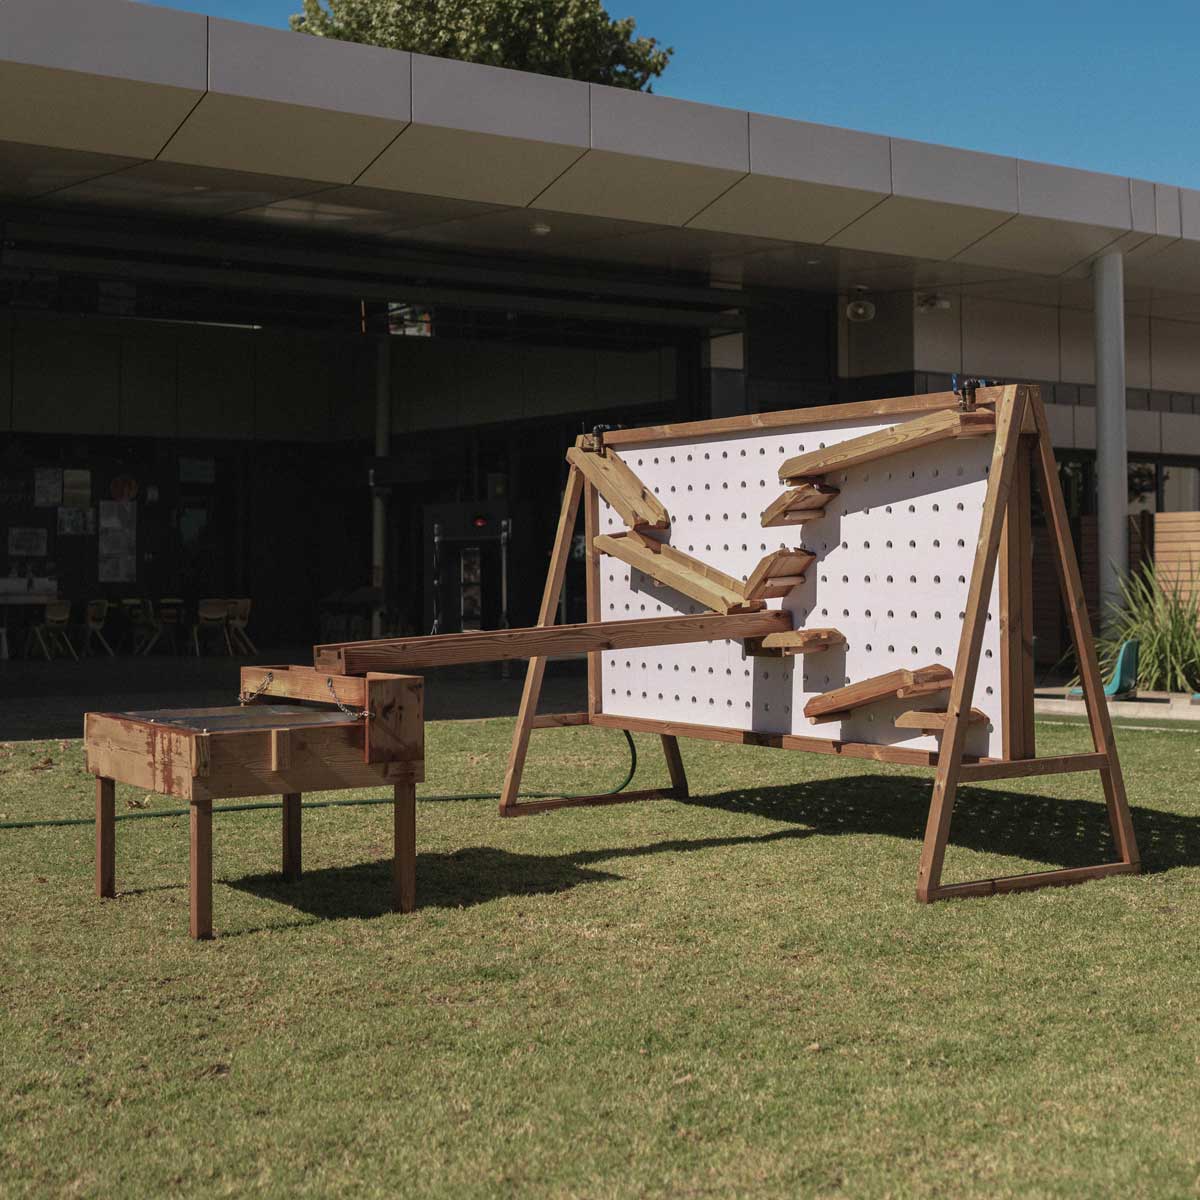 Kids Timber Outdoor Water Wall. Designed for teaching kids about cause and effect, motion, maths and other play-based learning skills, while having a bit of fun at the same time.